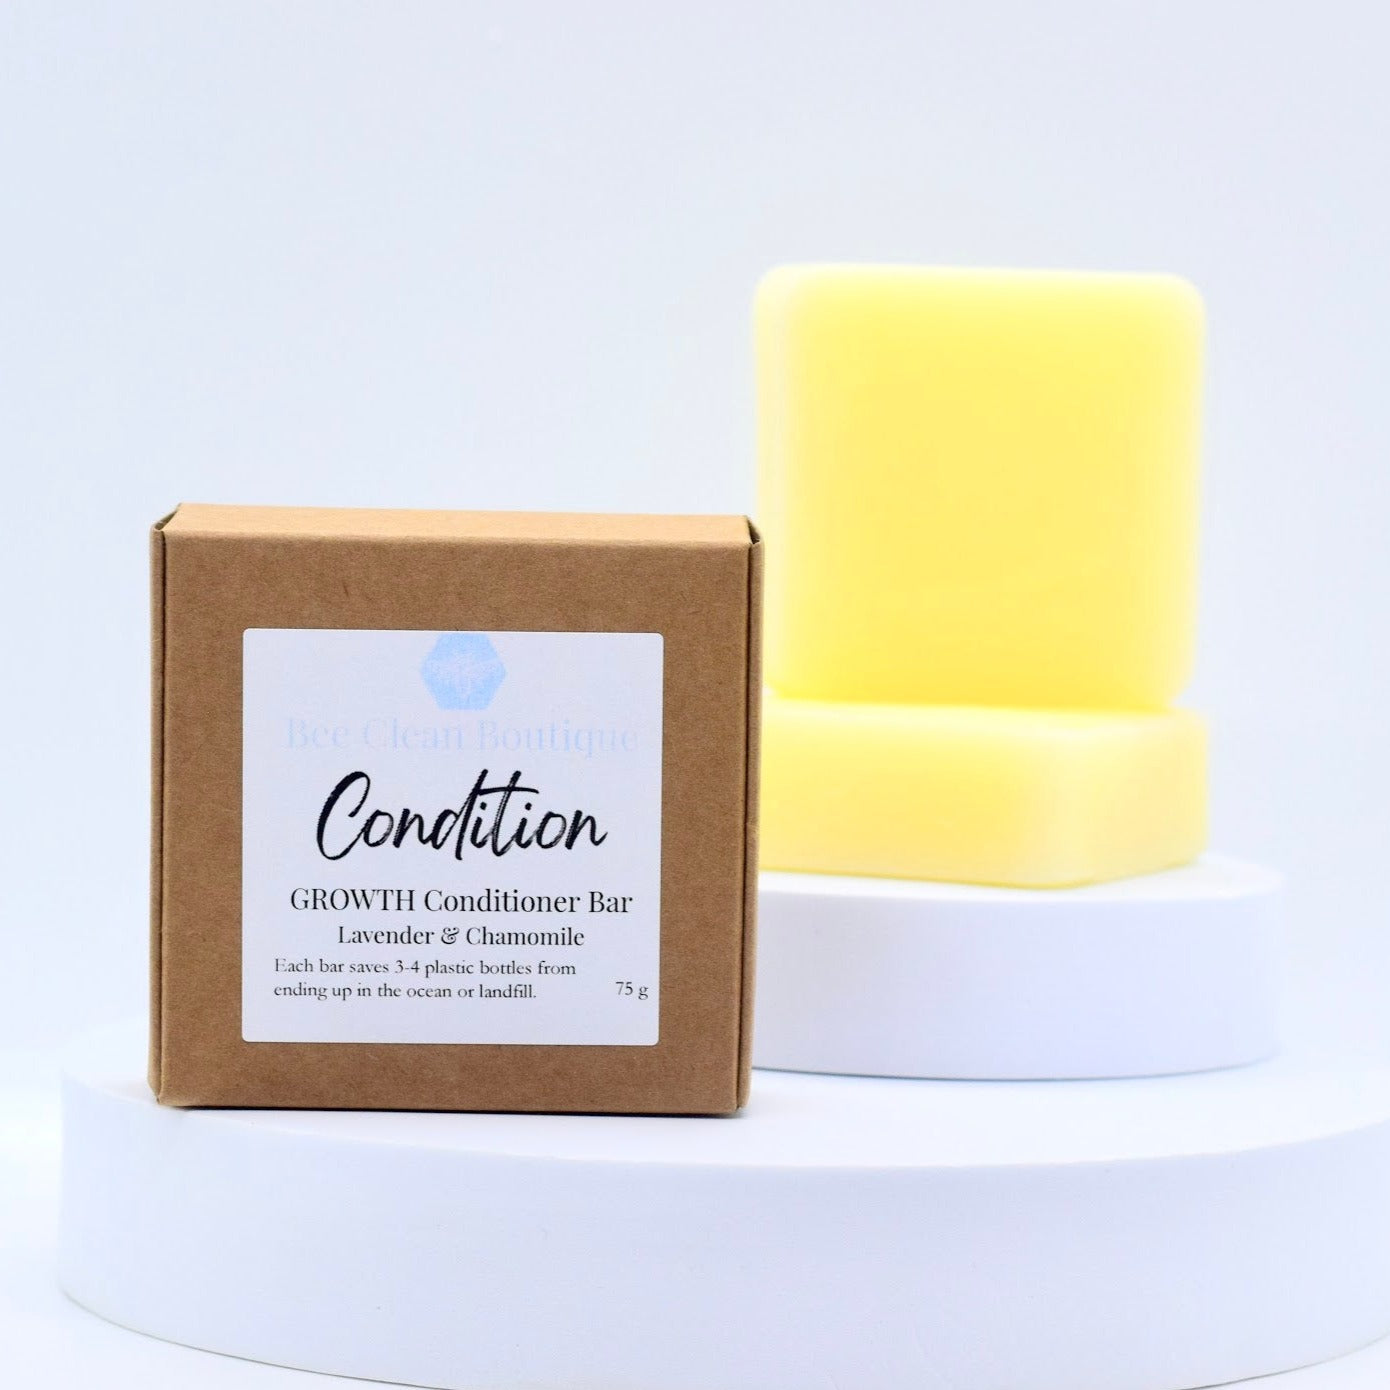 Growth conditioner bars on display; a labeled kraft box is featured